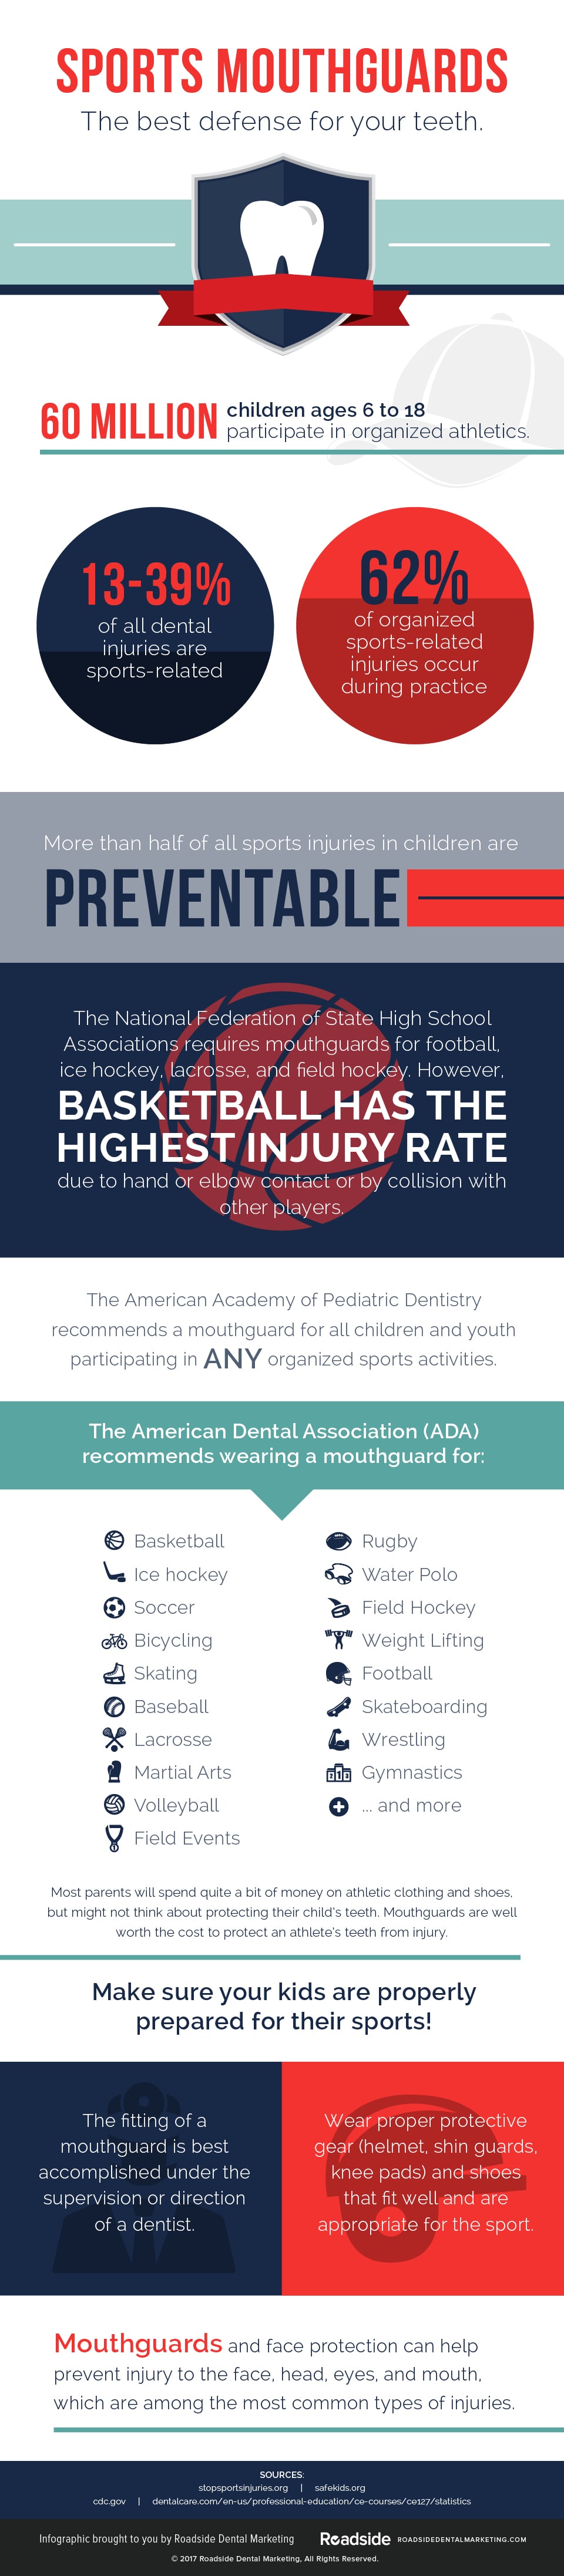 Sports mouthguards infographic